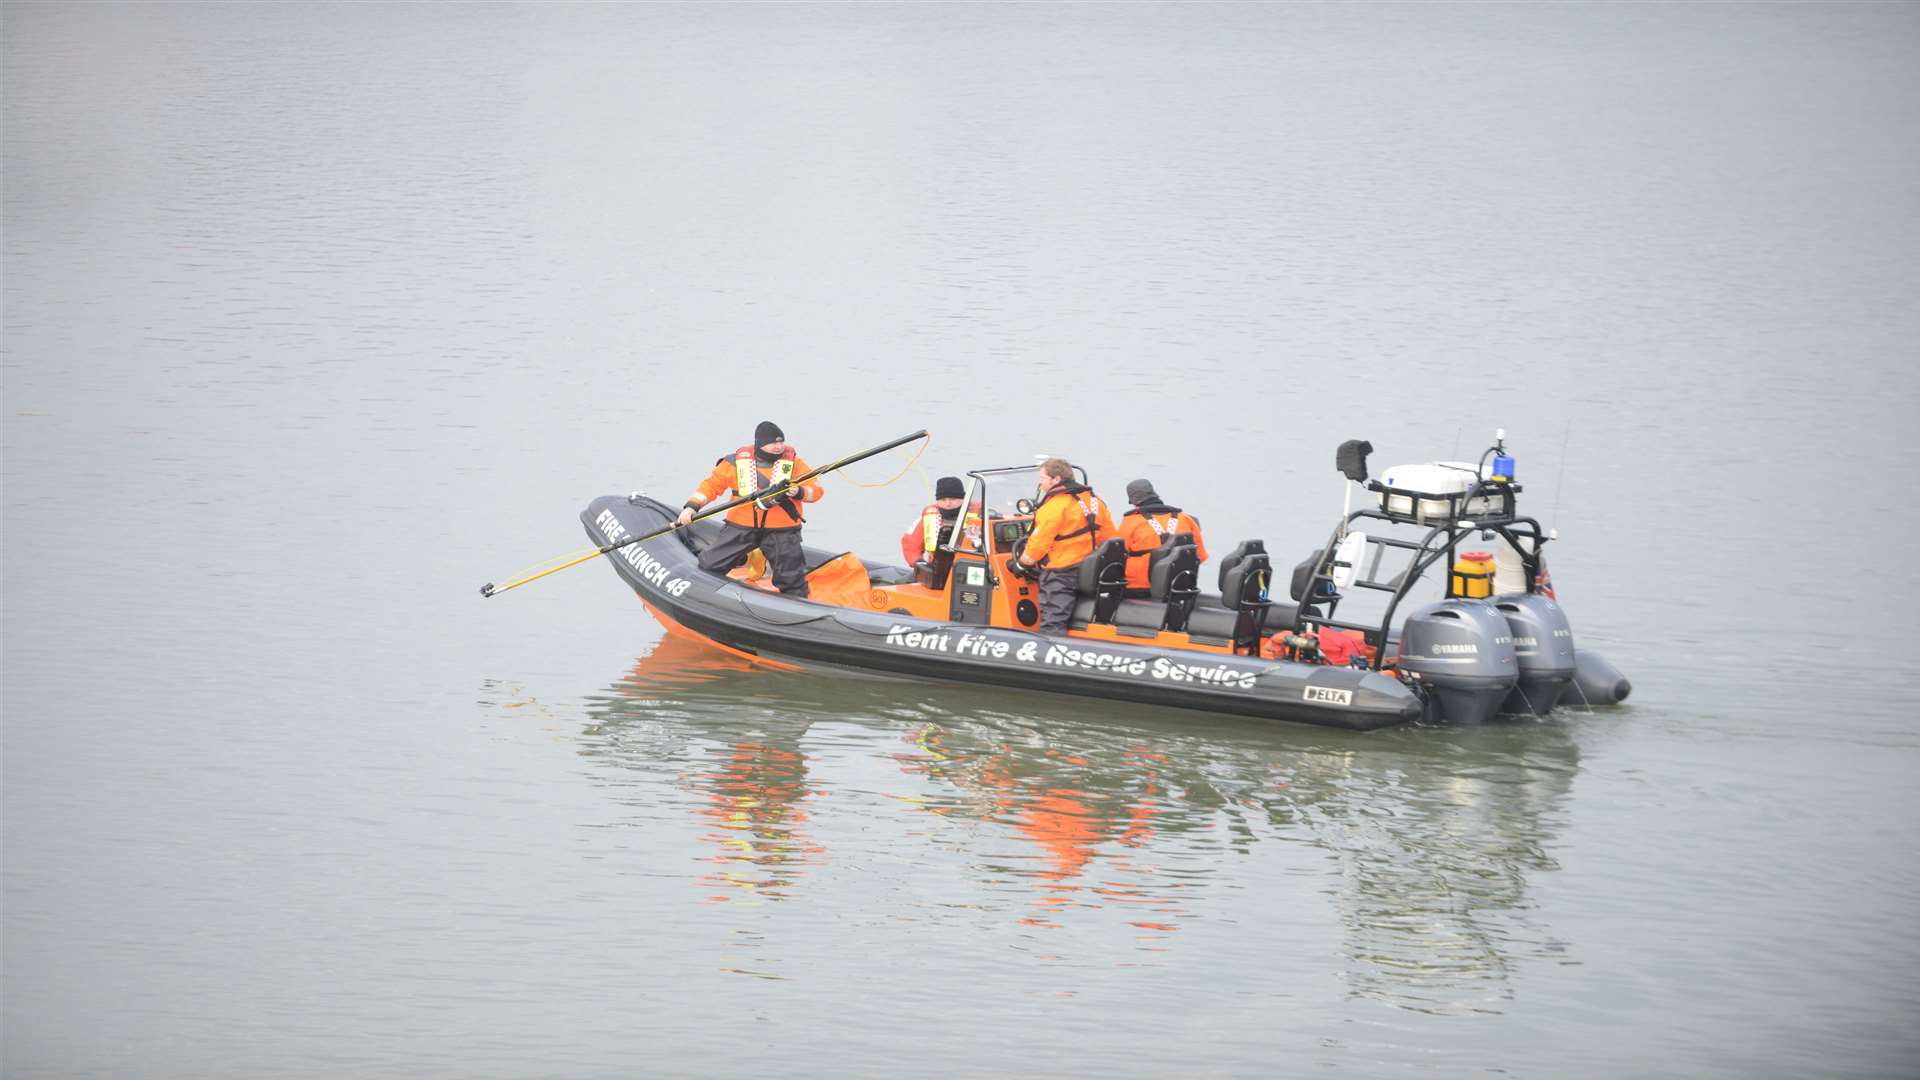 The emergency services were also out last week on the River Medway.